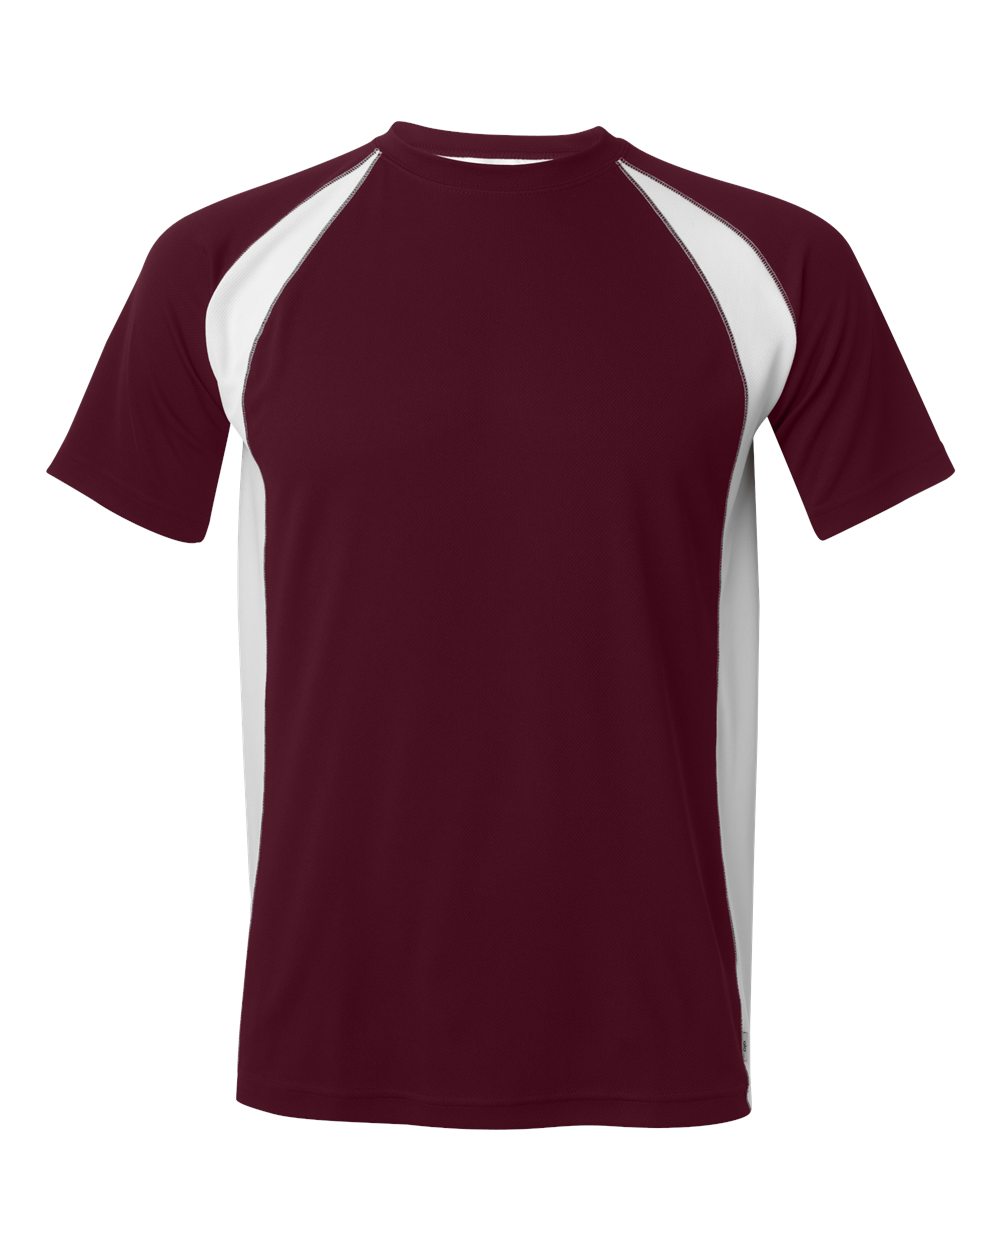 Top Shop Alo Maroon And White And Grey Short Sleeve Colorblock T ...